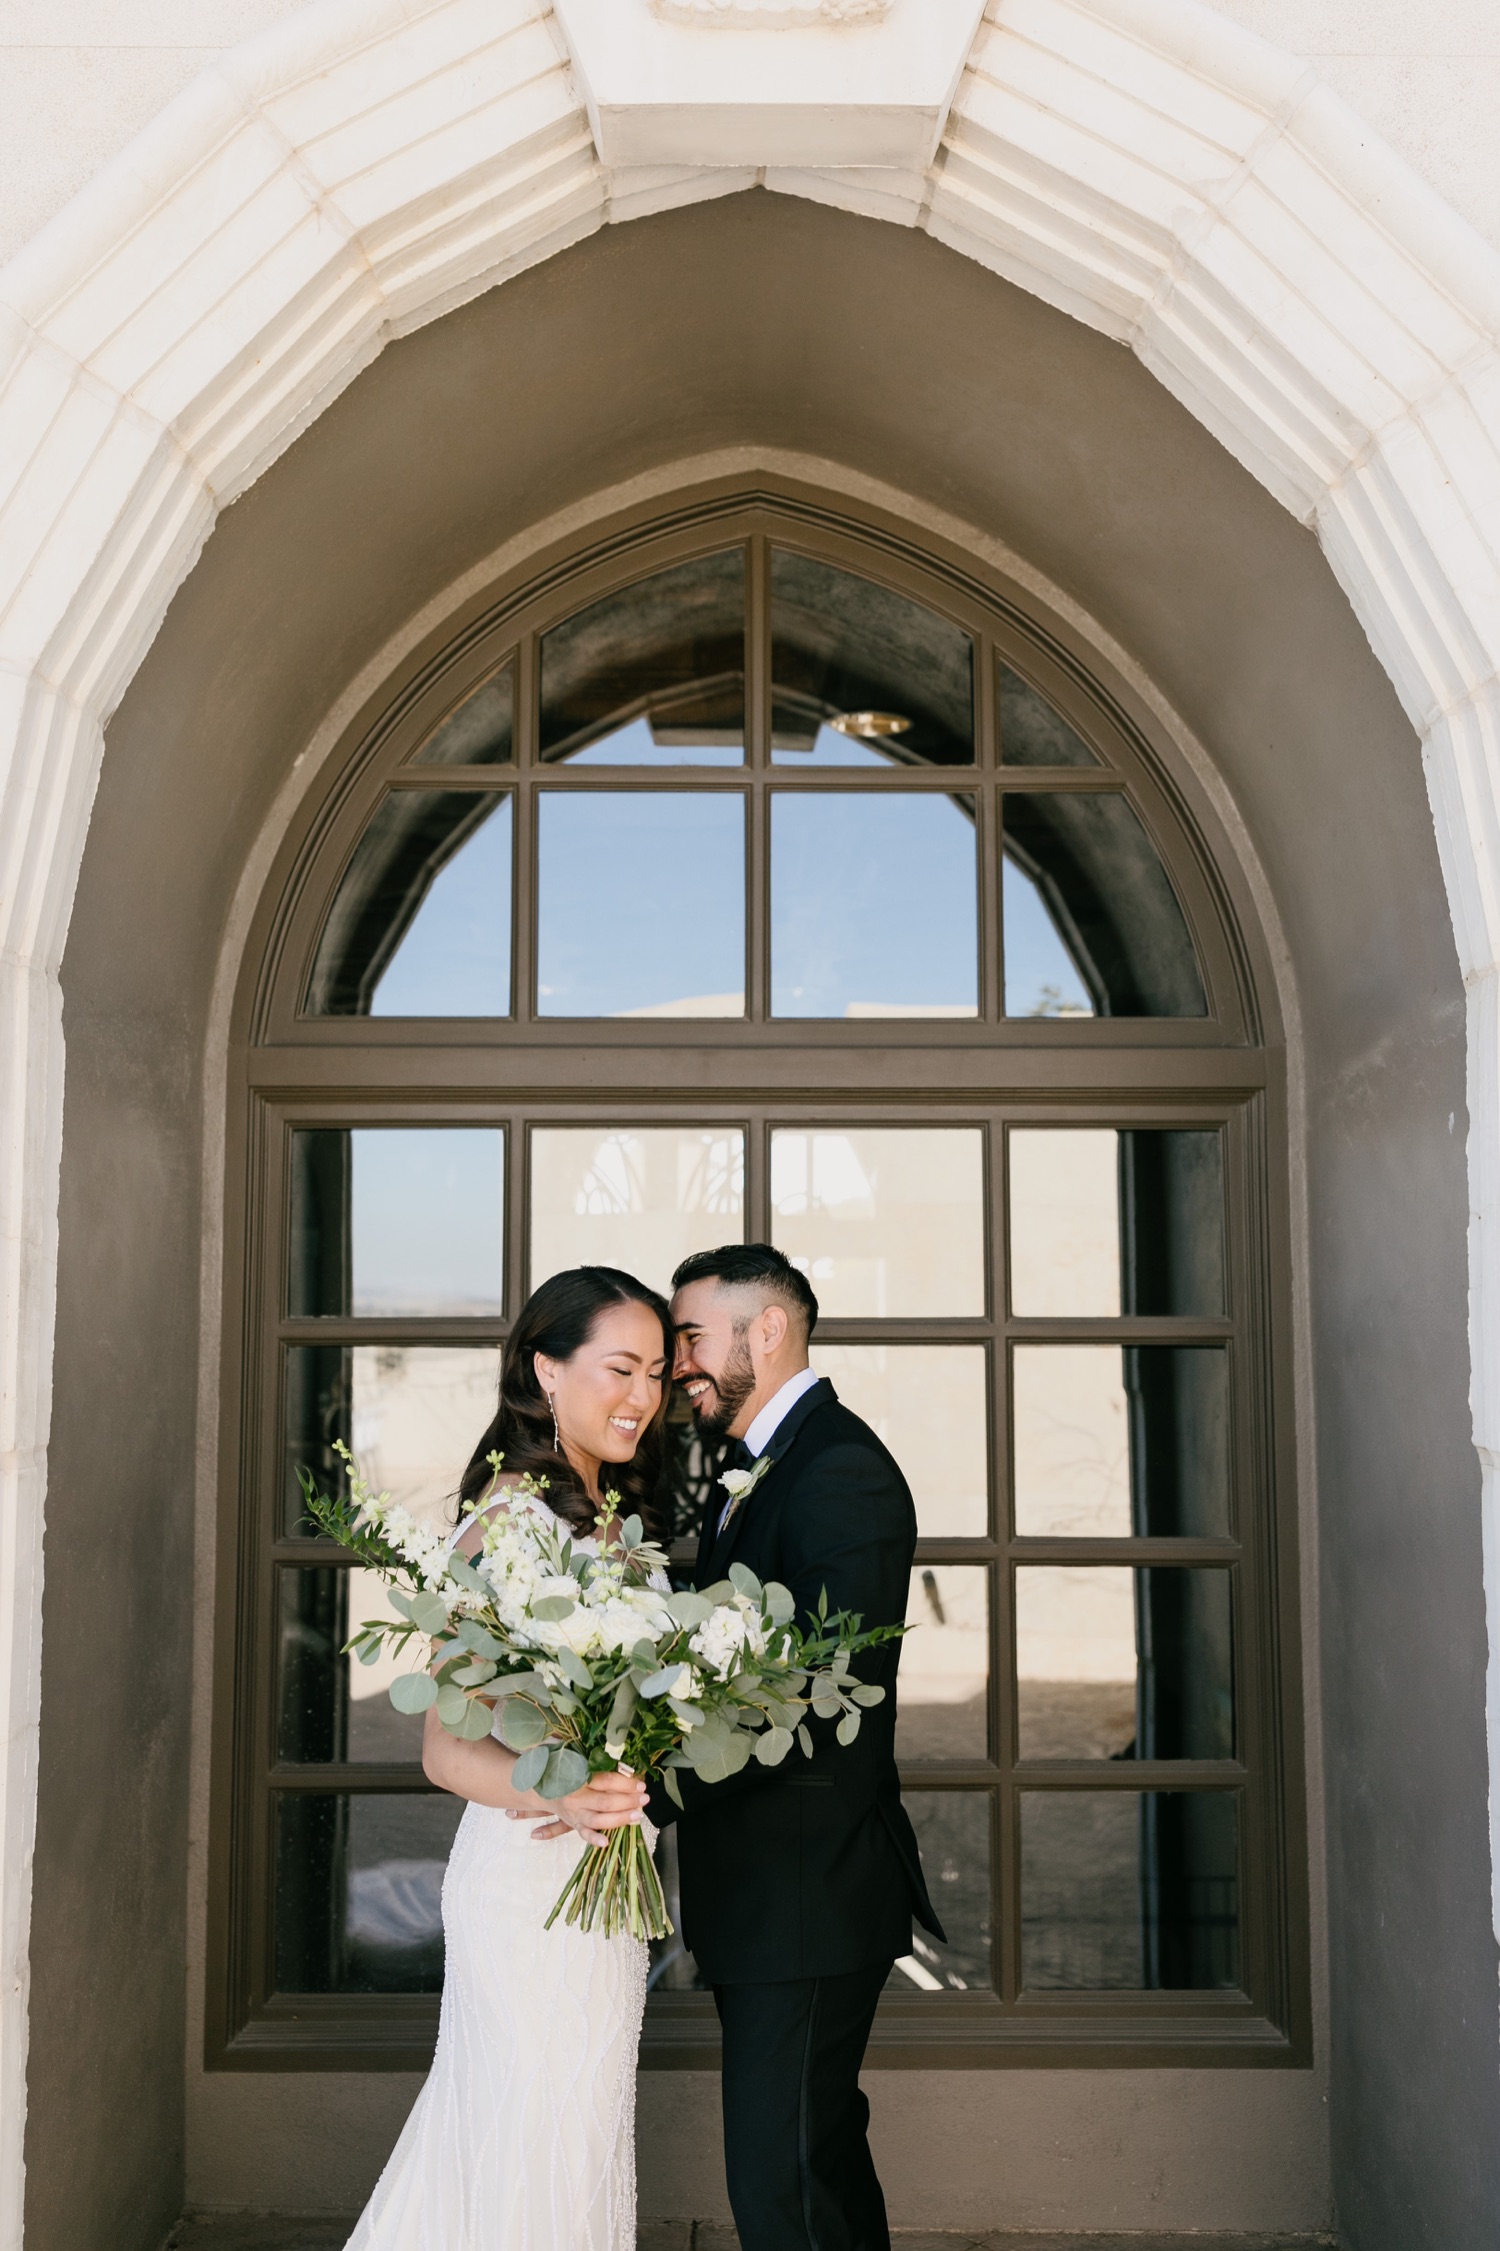 Bride and groom snuggling together on their wedding day at Tooth and nail winery in Paso robles, California. Photos by Tayler Enerle